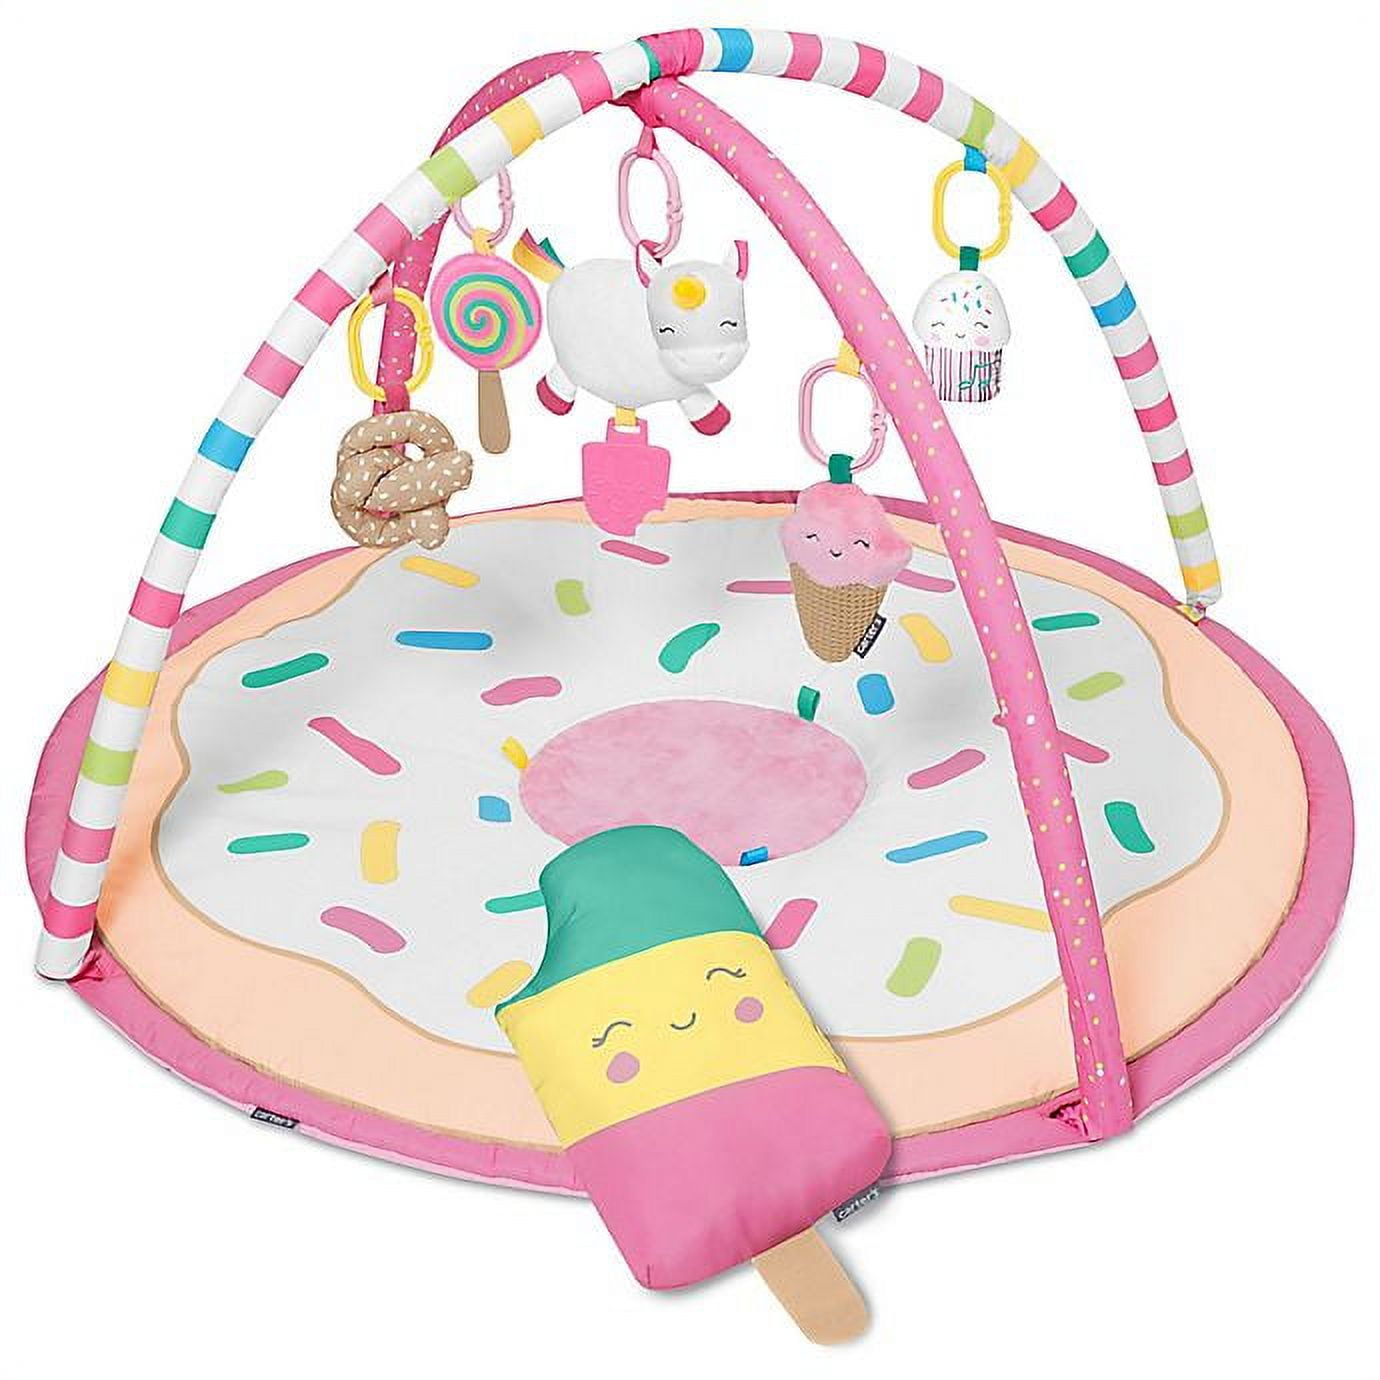 Carter's Sweet Surprise Baby Activity Gym, Pink 141［並行輸入］ その他おもちゃ